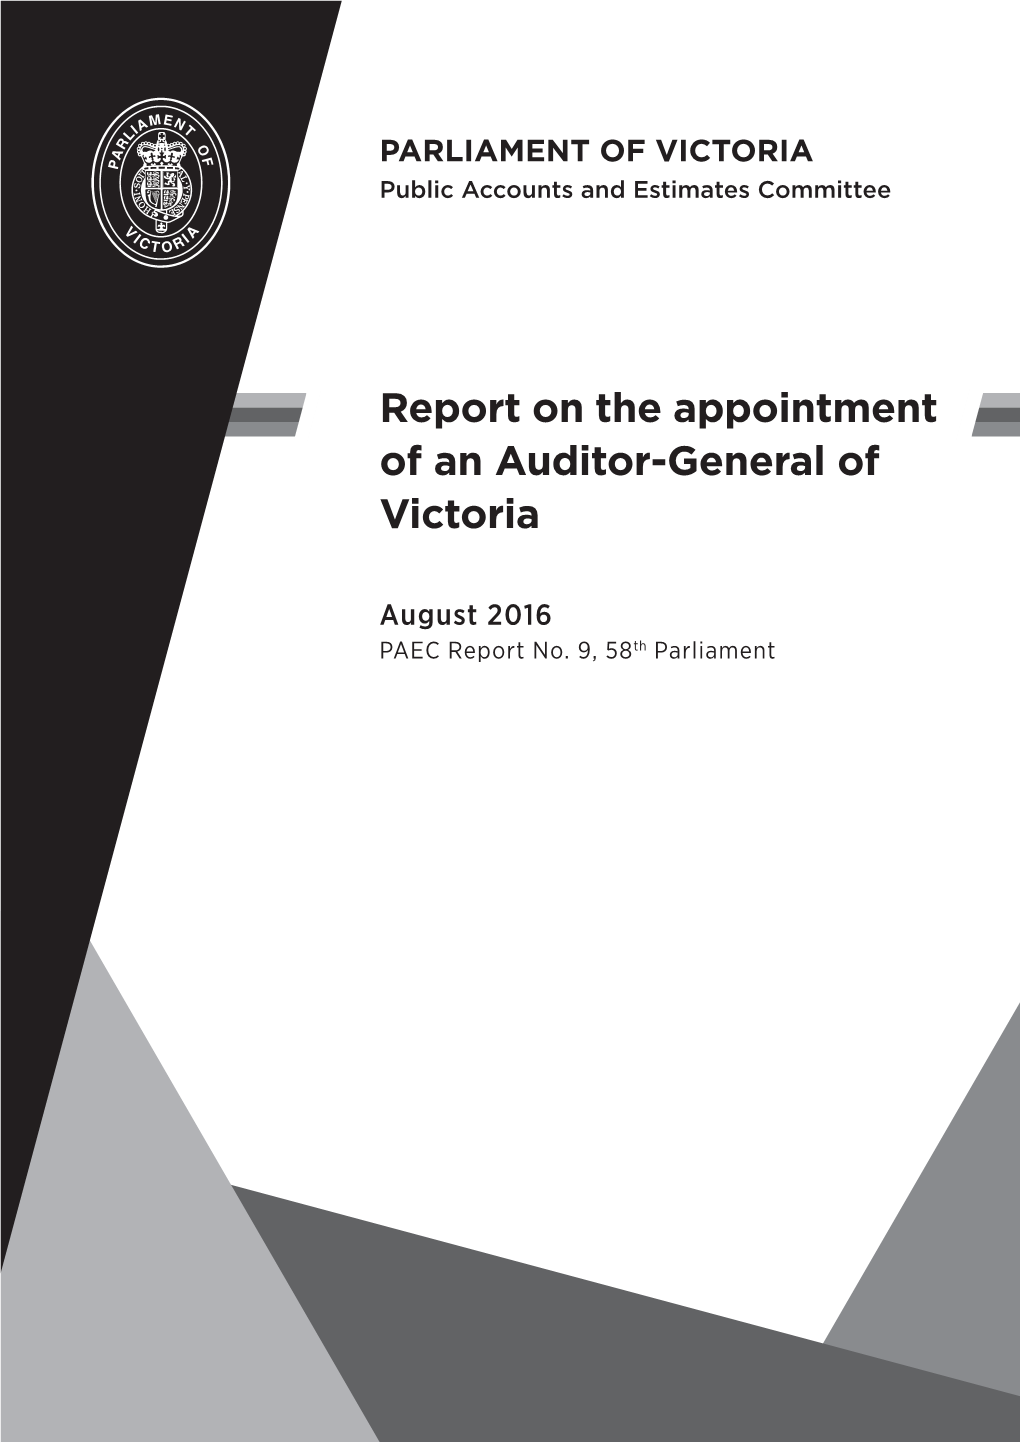 Report on the Appointment of an Auditor-General of Victoria